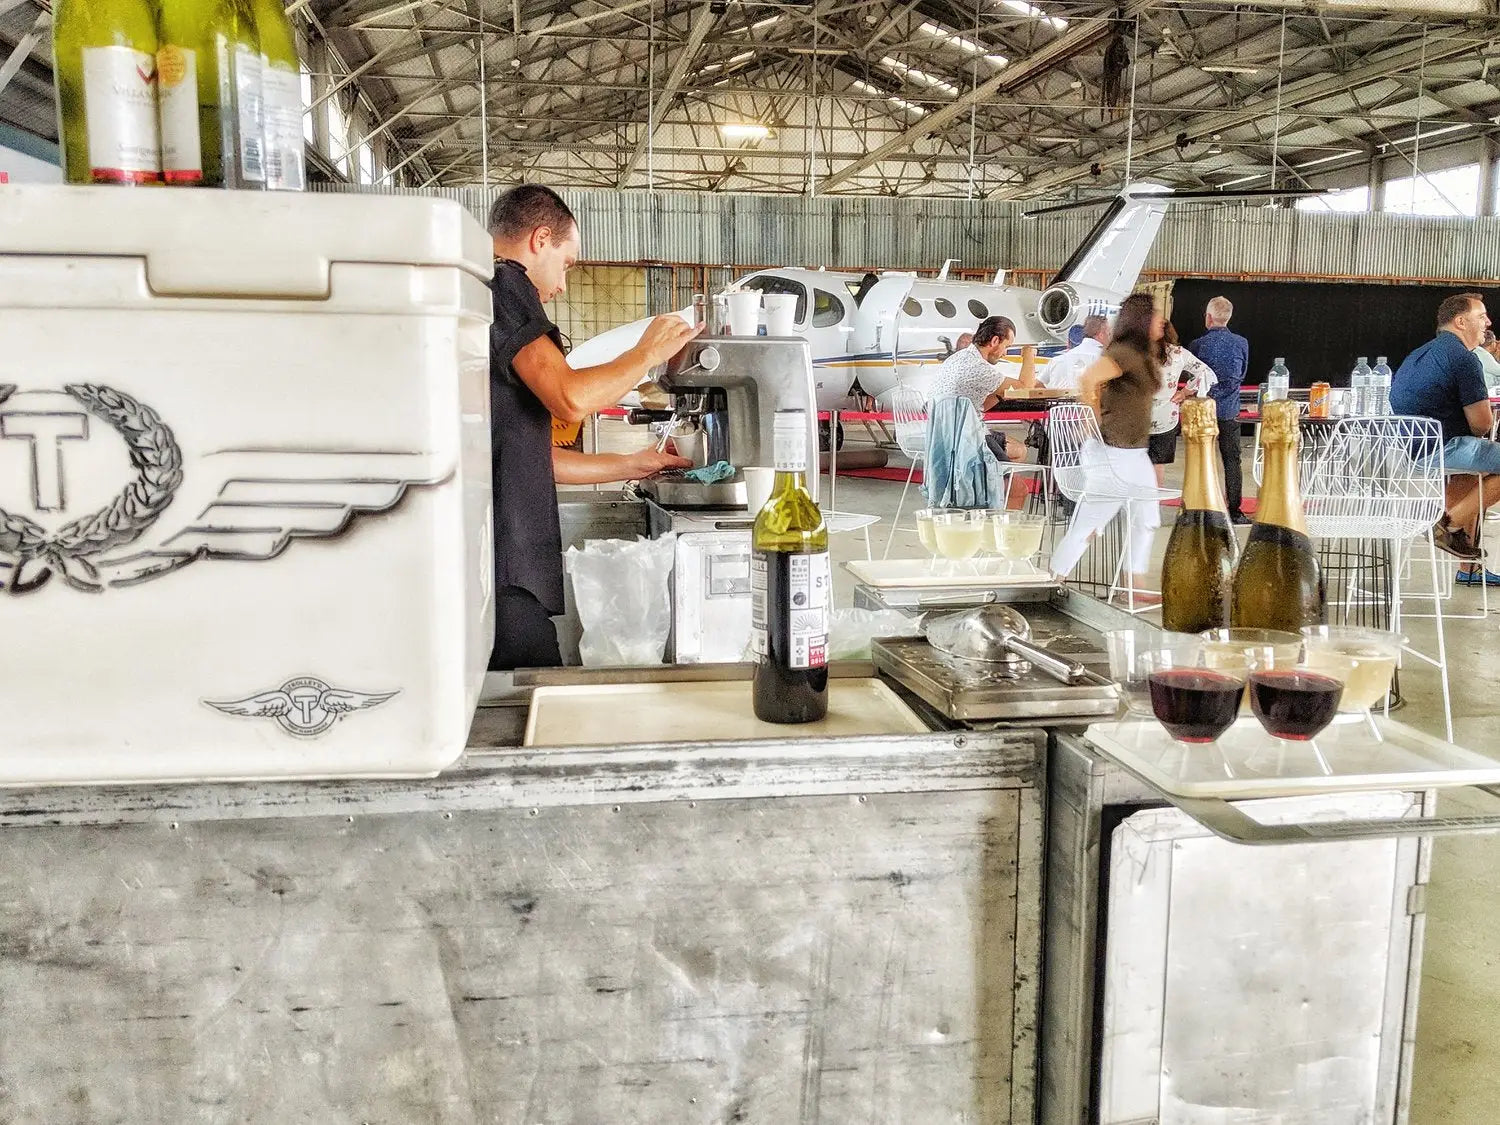 Busy event scene featuring Trolley'd mobile bar and coffee van setup in an airplane hangar, with a bartender preparing drinks. The bar displays an assortment of beverages including wine, champagne, and crafted cocktails, set against the backdrop of a small private jet and a gathering of guests, creating a dynamic and upscale event atmosphere.